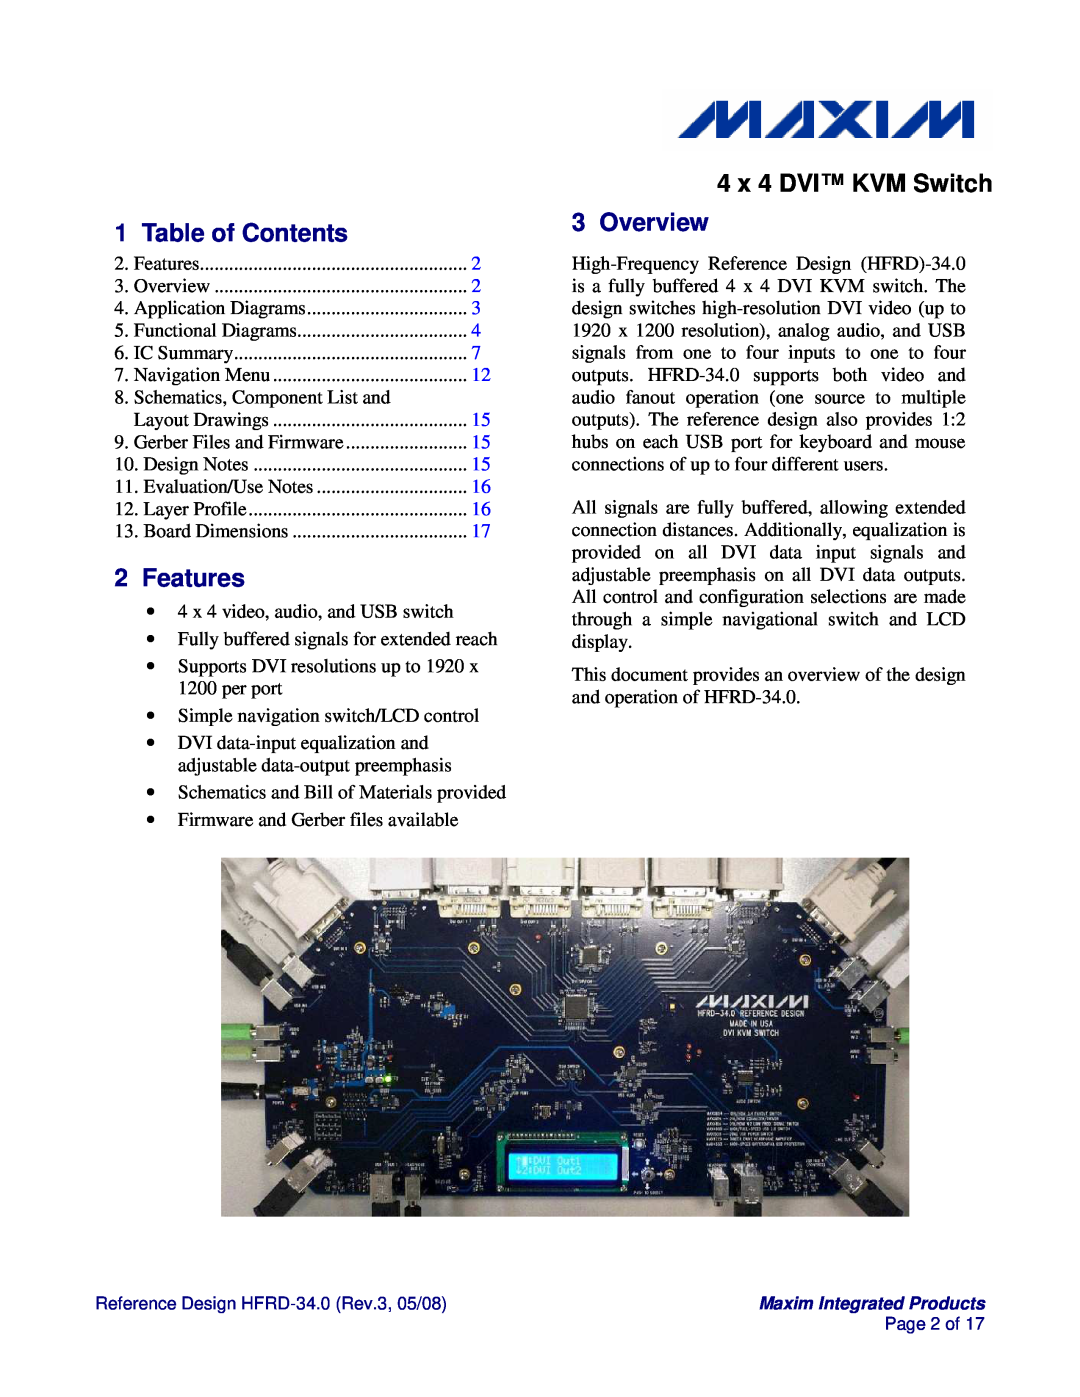 Maxim HFRD-34.0 manual Table of Contents, Features, Overview, 4 x 4 DVI KVM Switch 